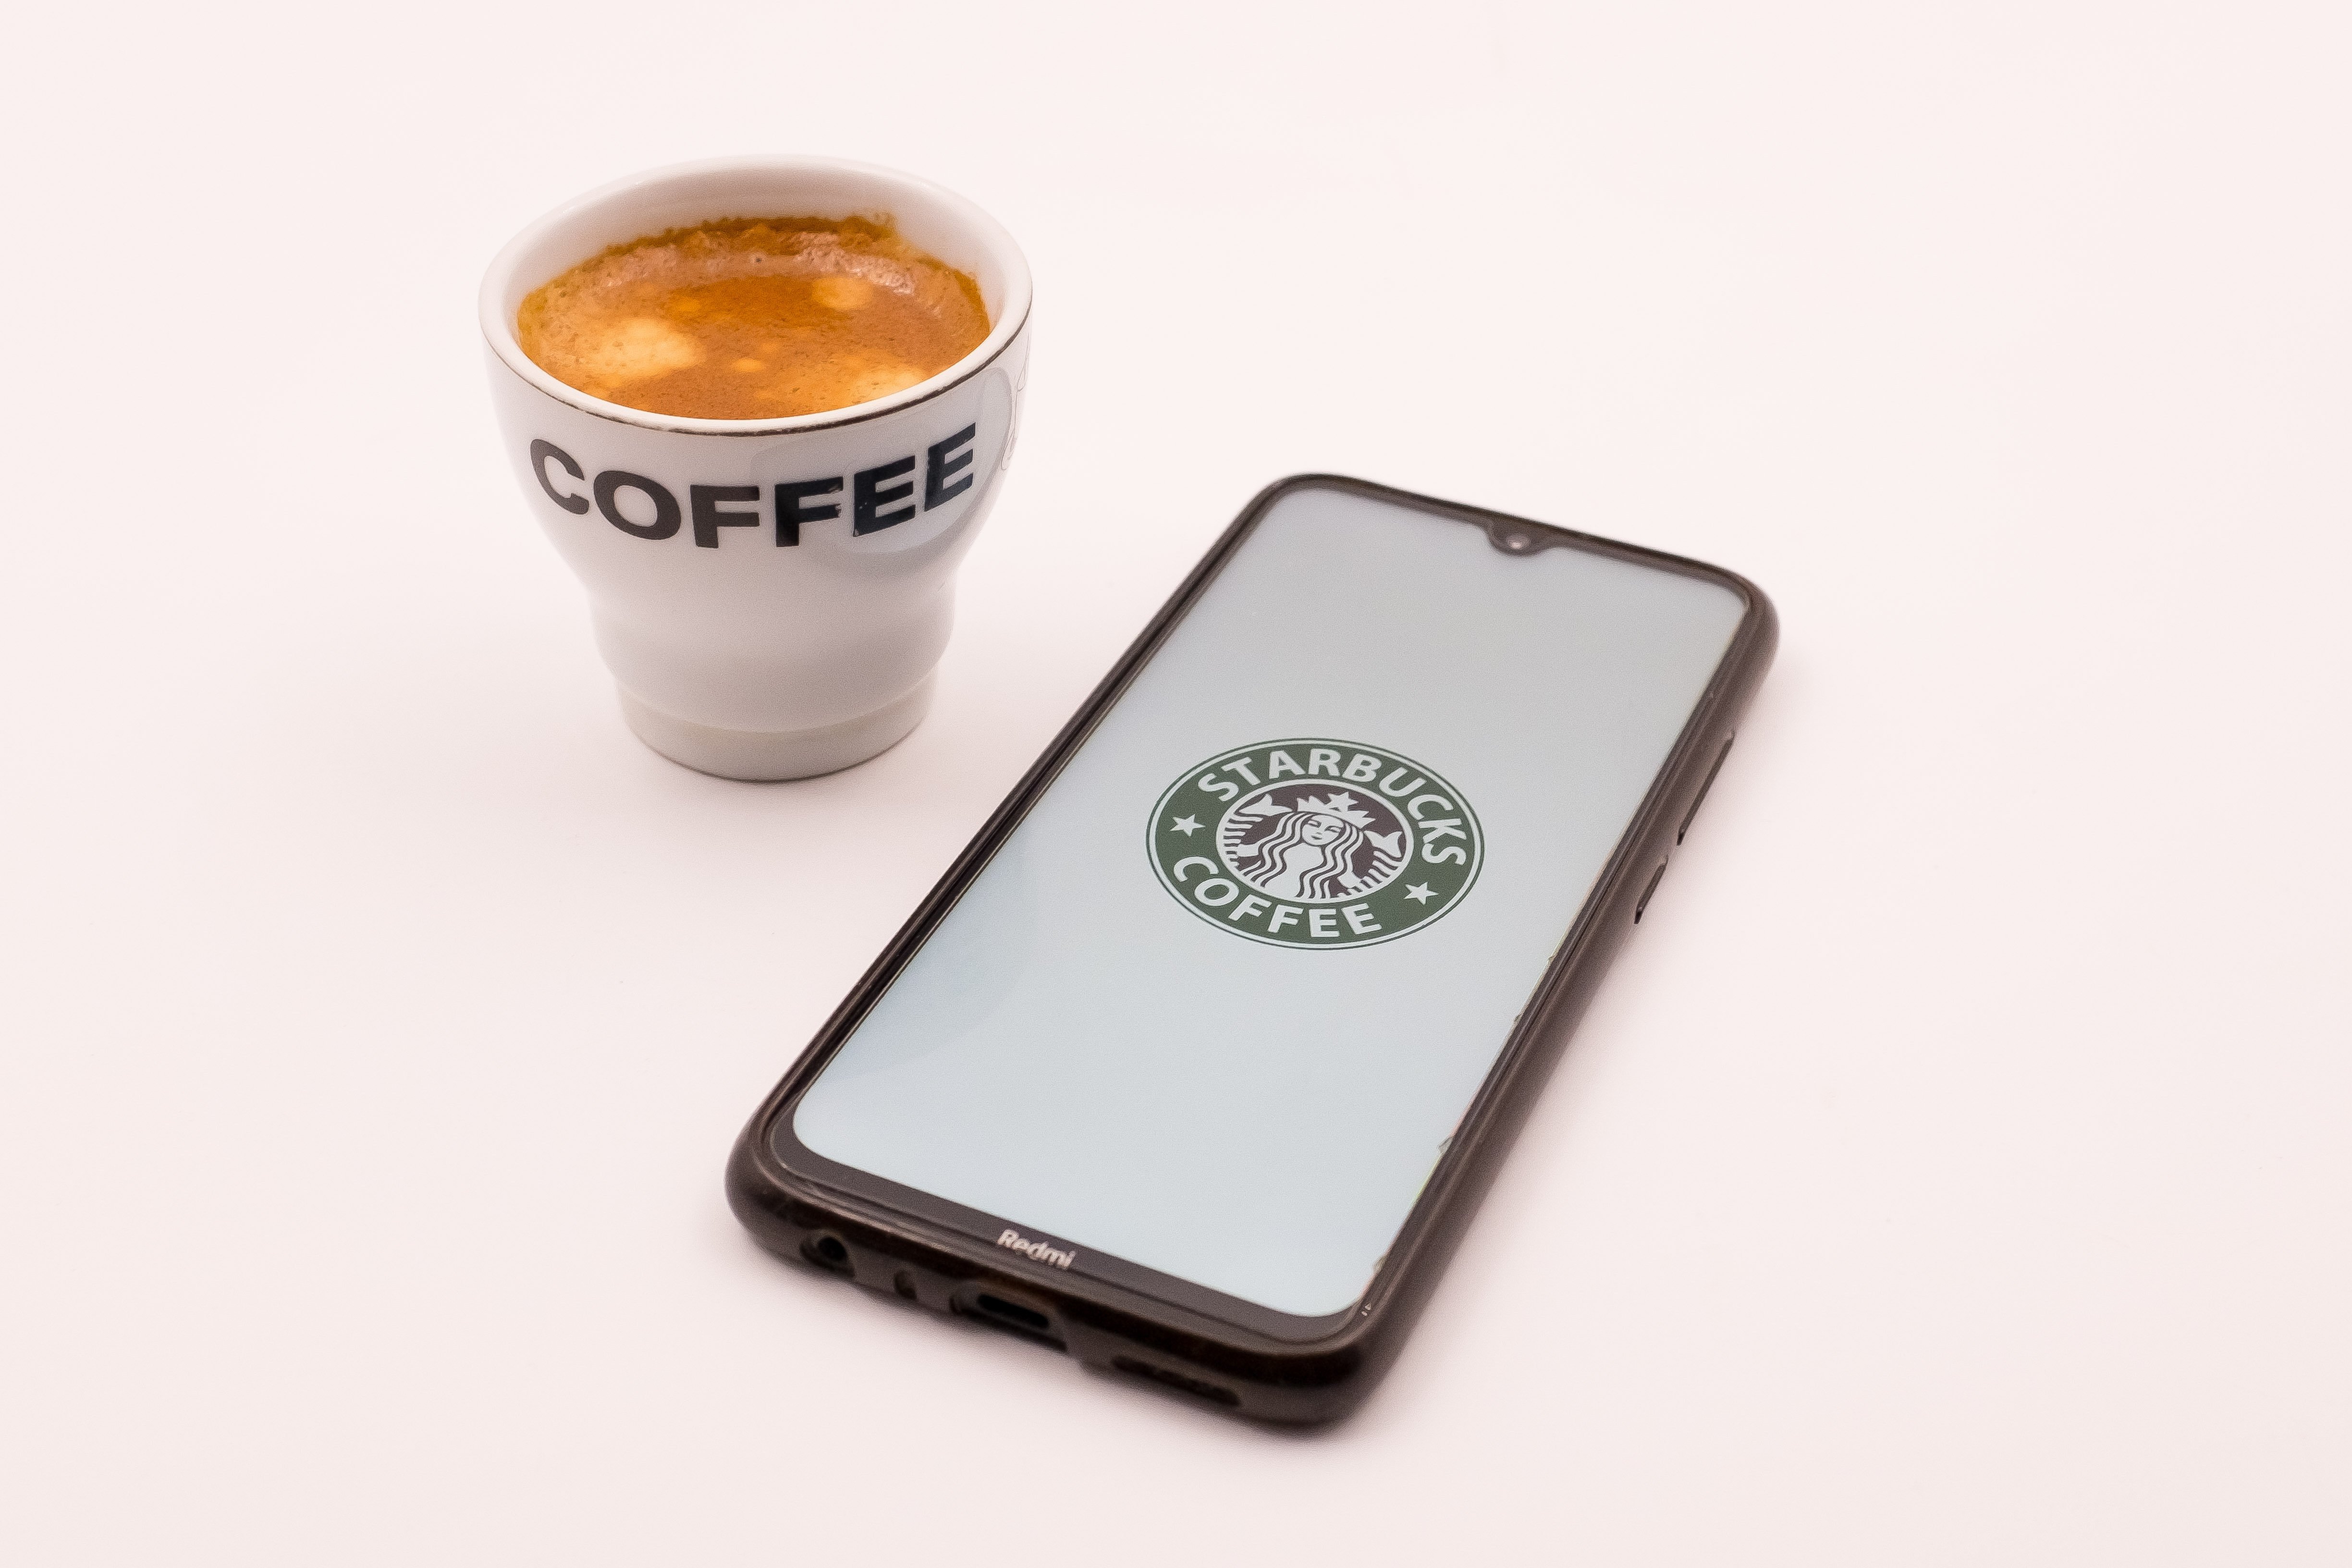 Starbucks logo on an iPhone next to a cup of coffee